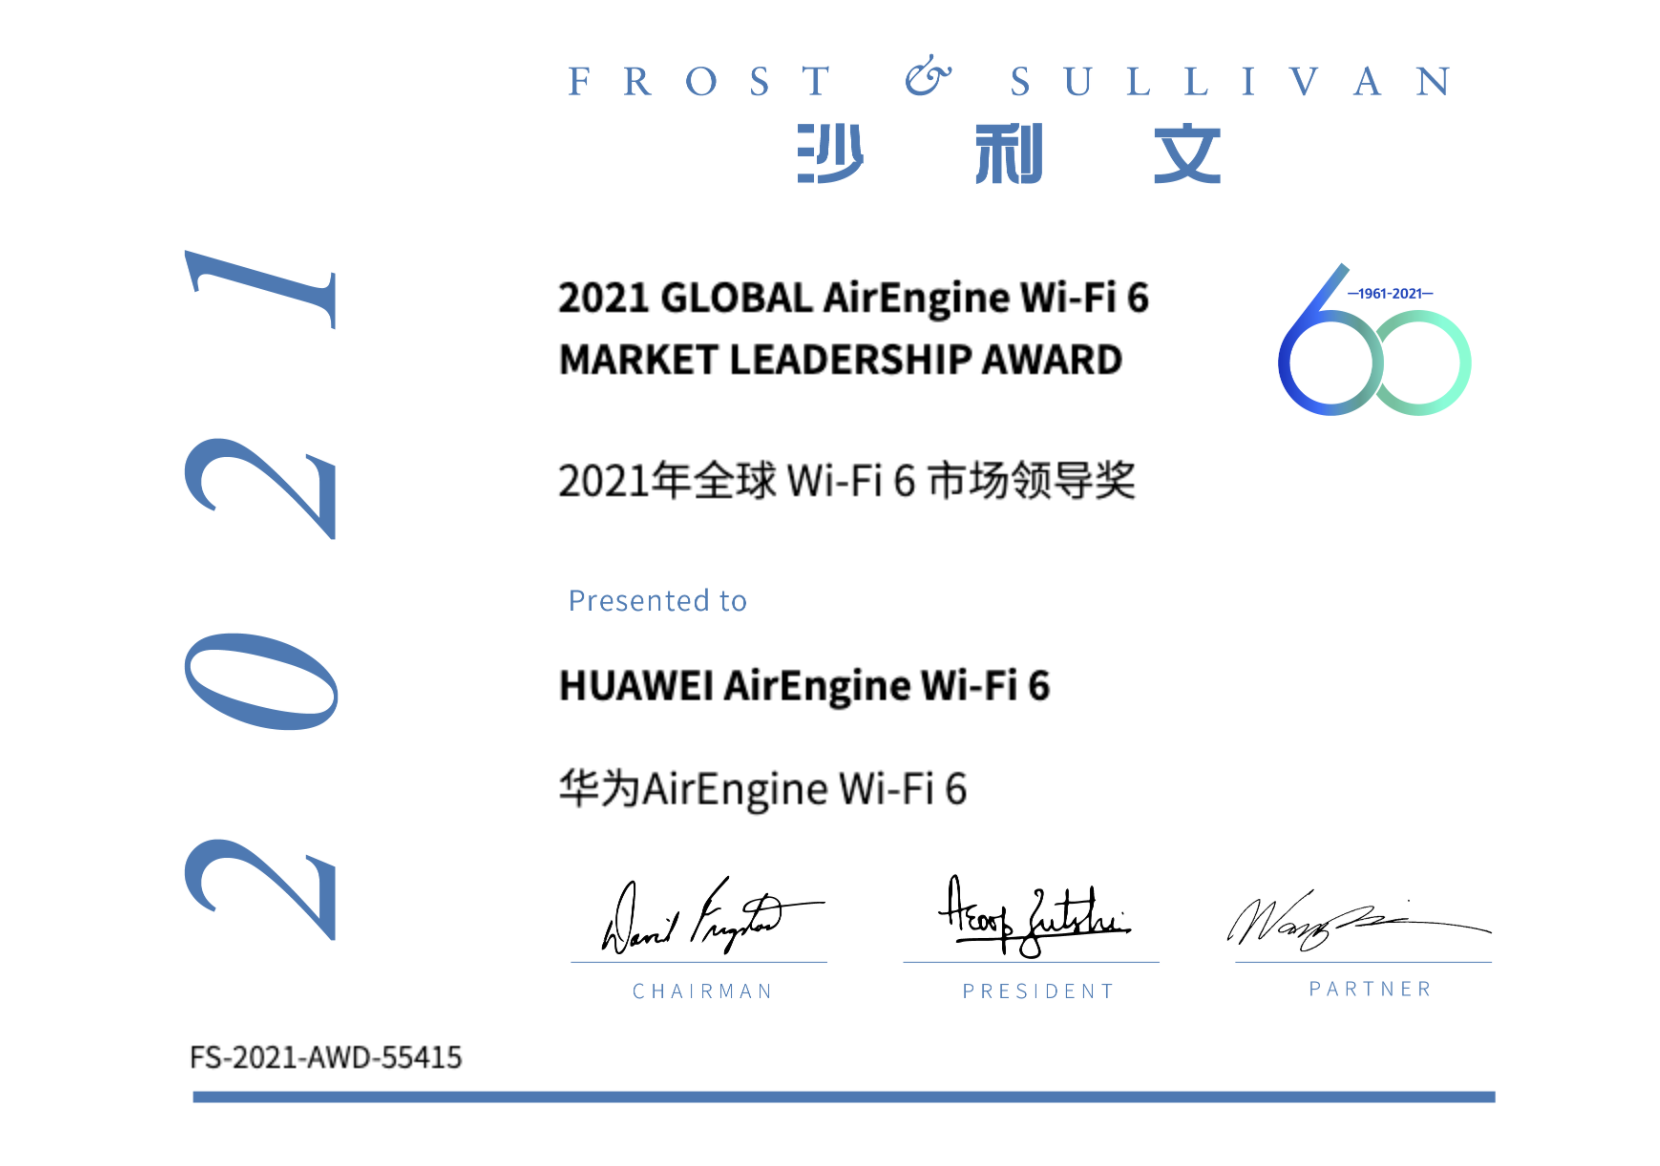 A certificate showing Huawei AirEngine Wi-Fi 6 products were recognized with a Frost & Sullivan Market Leadership Award